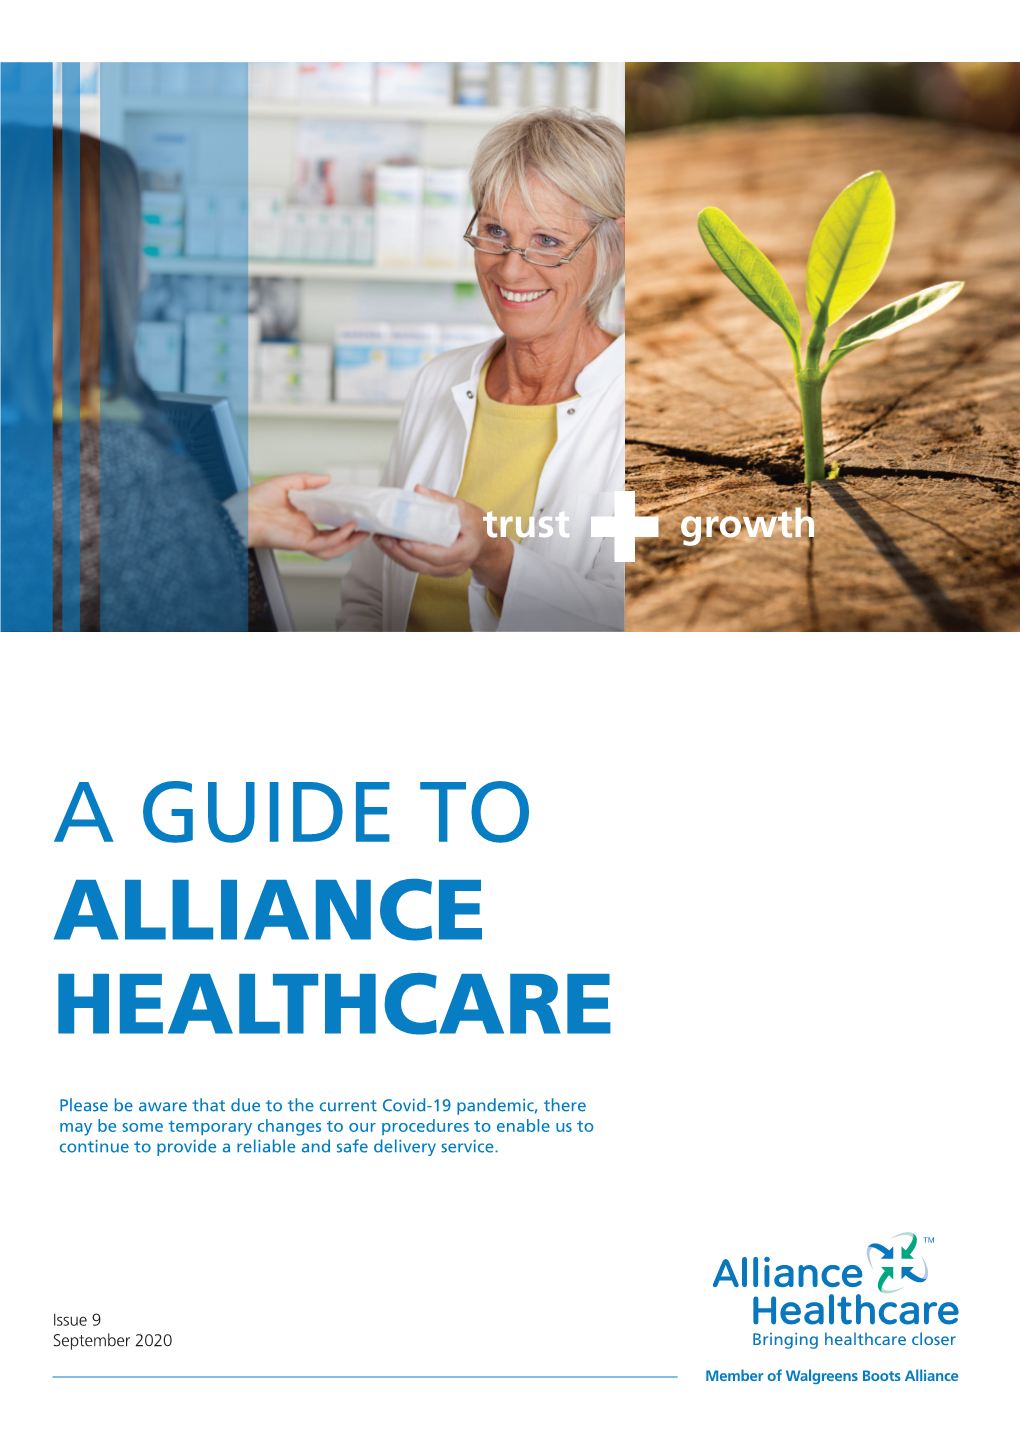 A Guide to Alliance Healthcare